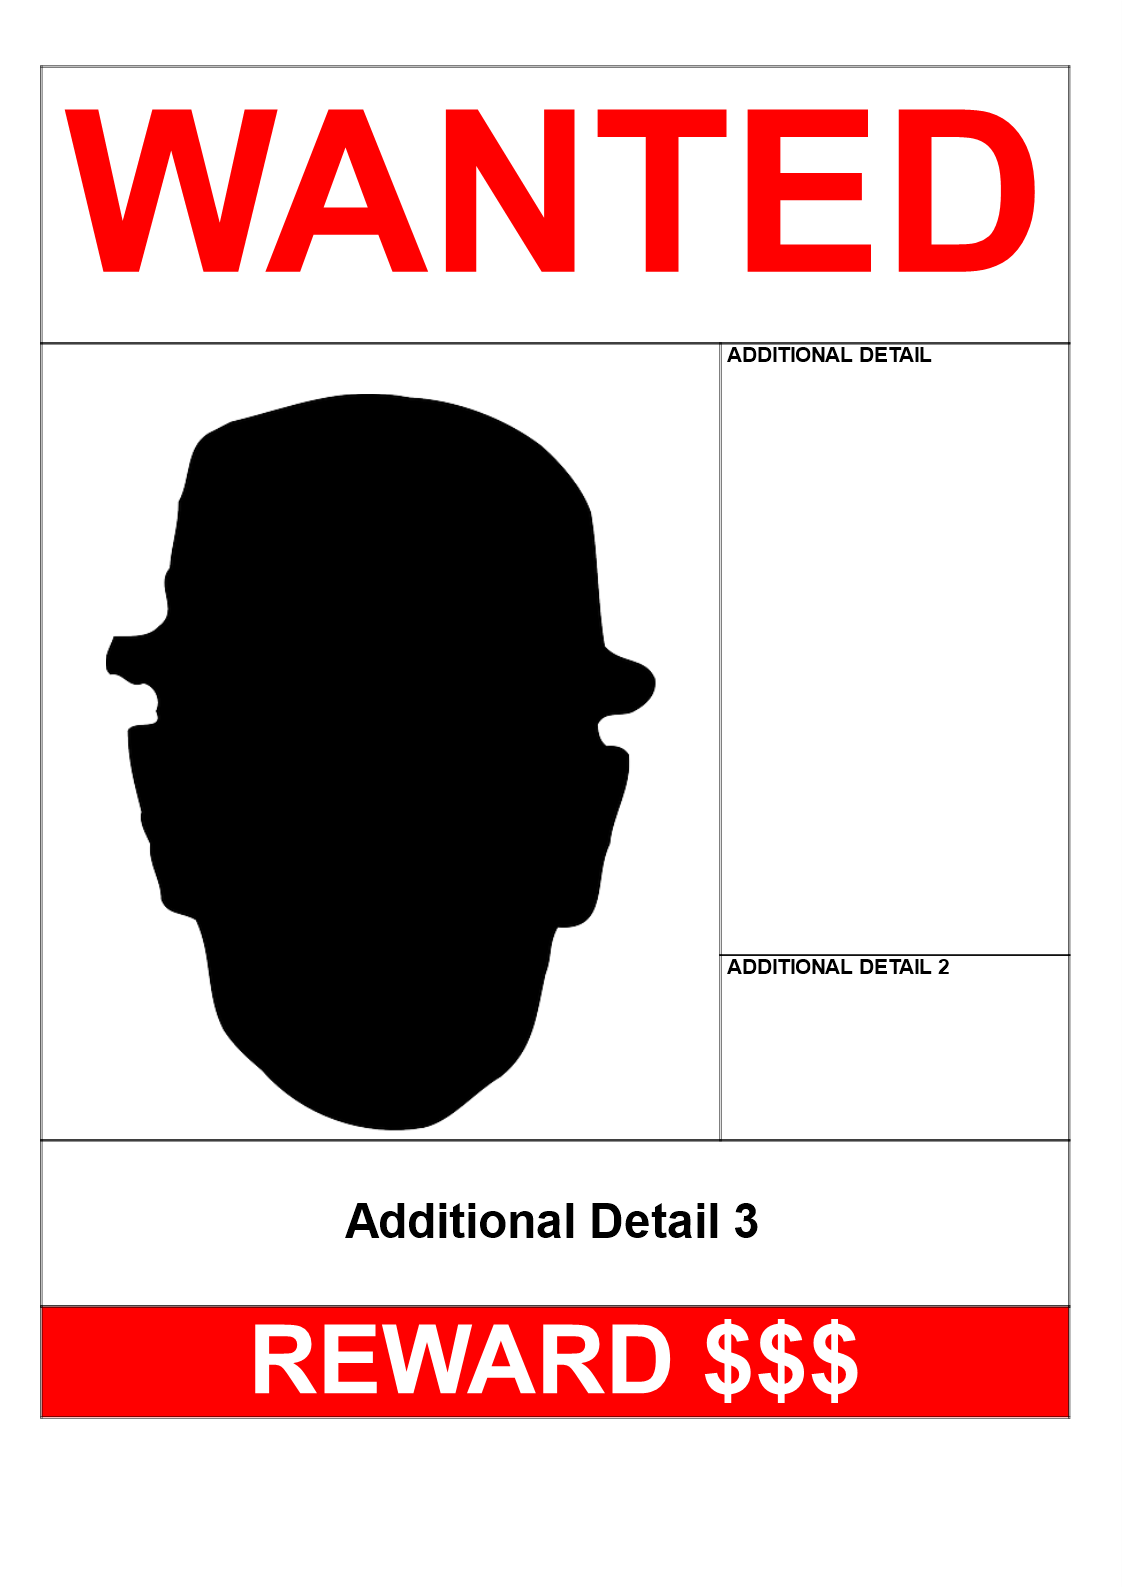 Wanted Poster A3 Size design | Templates at allbusinesstemplates.com